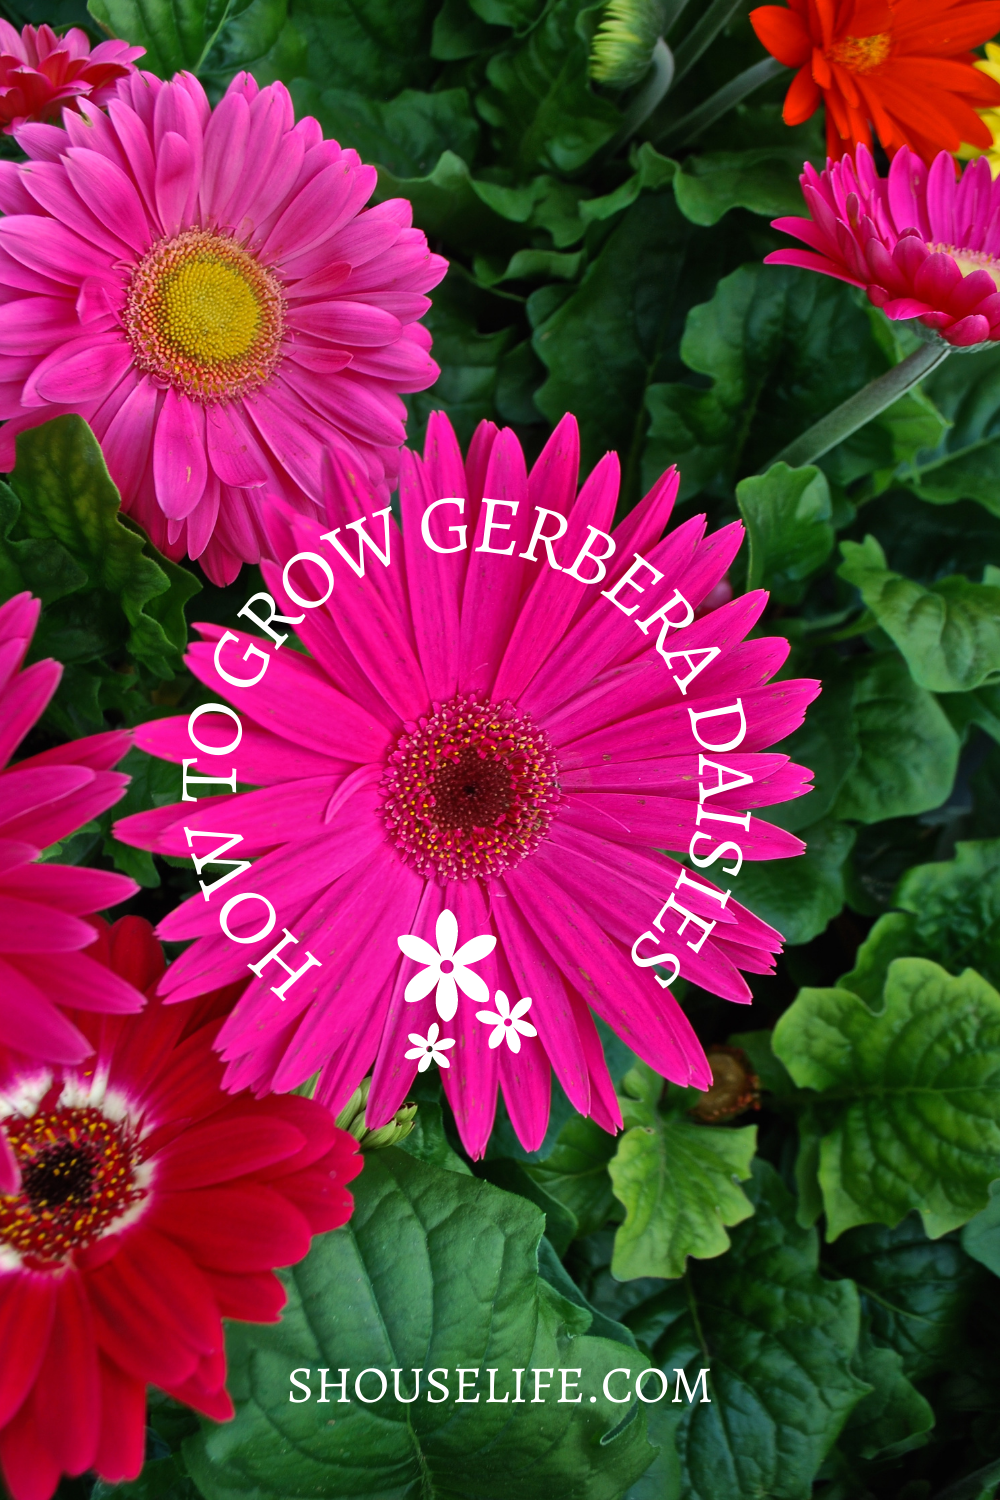 How to Grow and Care for Gerbera Daisies from Seed